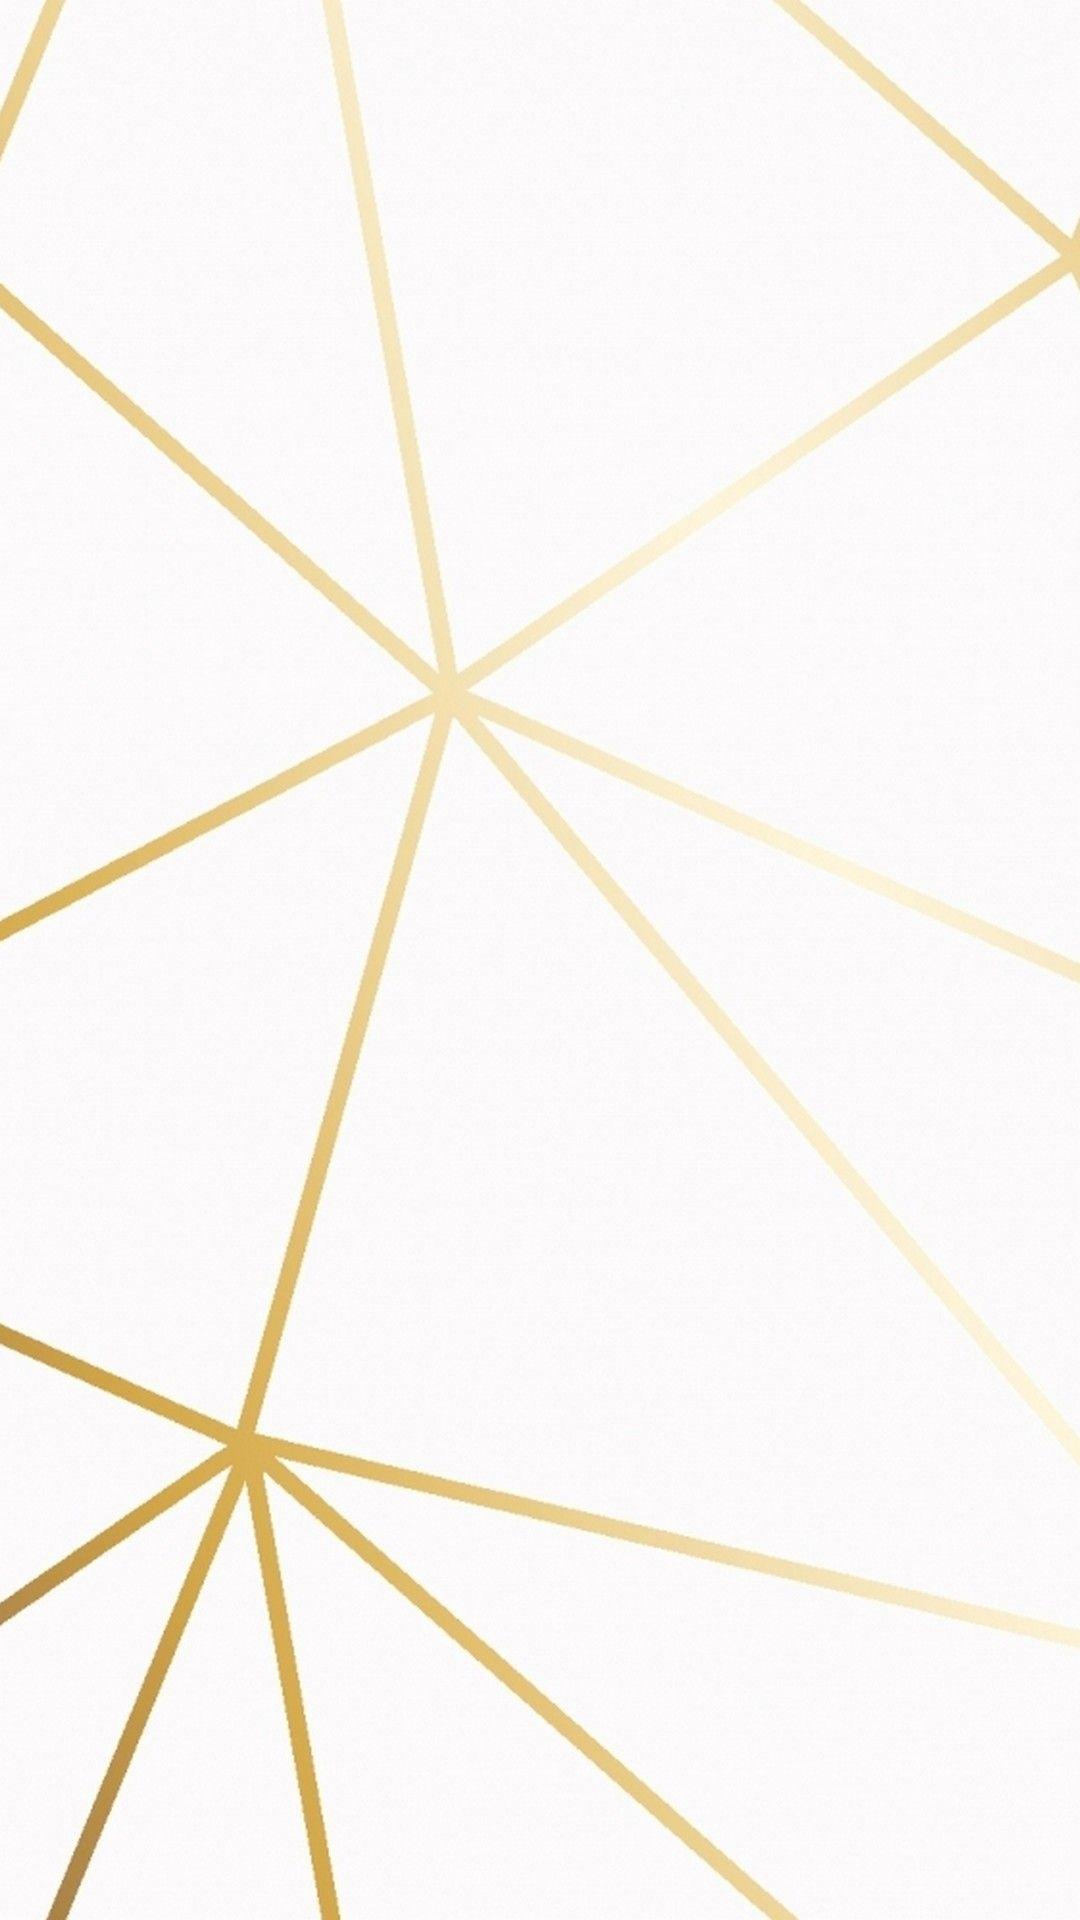 White and Gold iPhone Wallpaper. Gold wallpaper iphone, iPhone